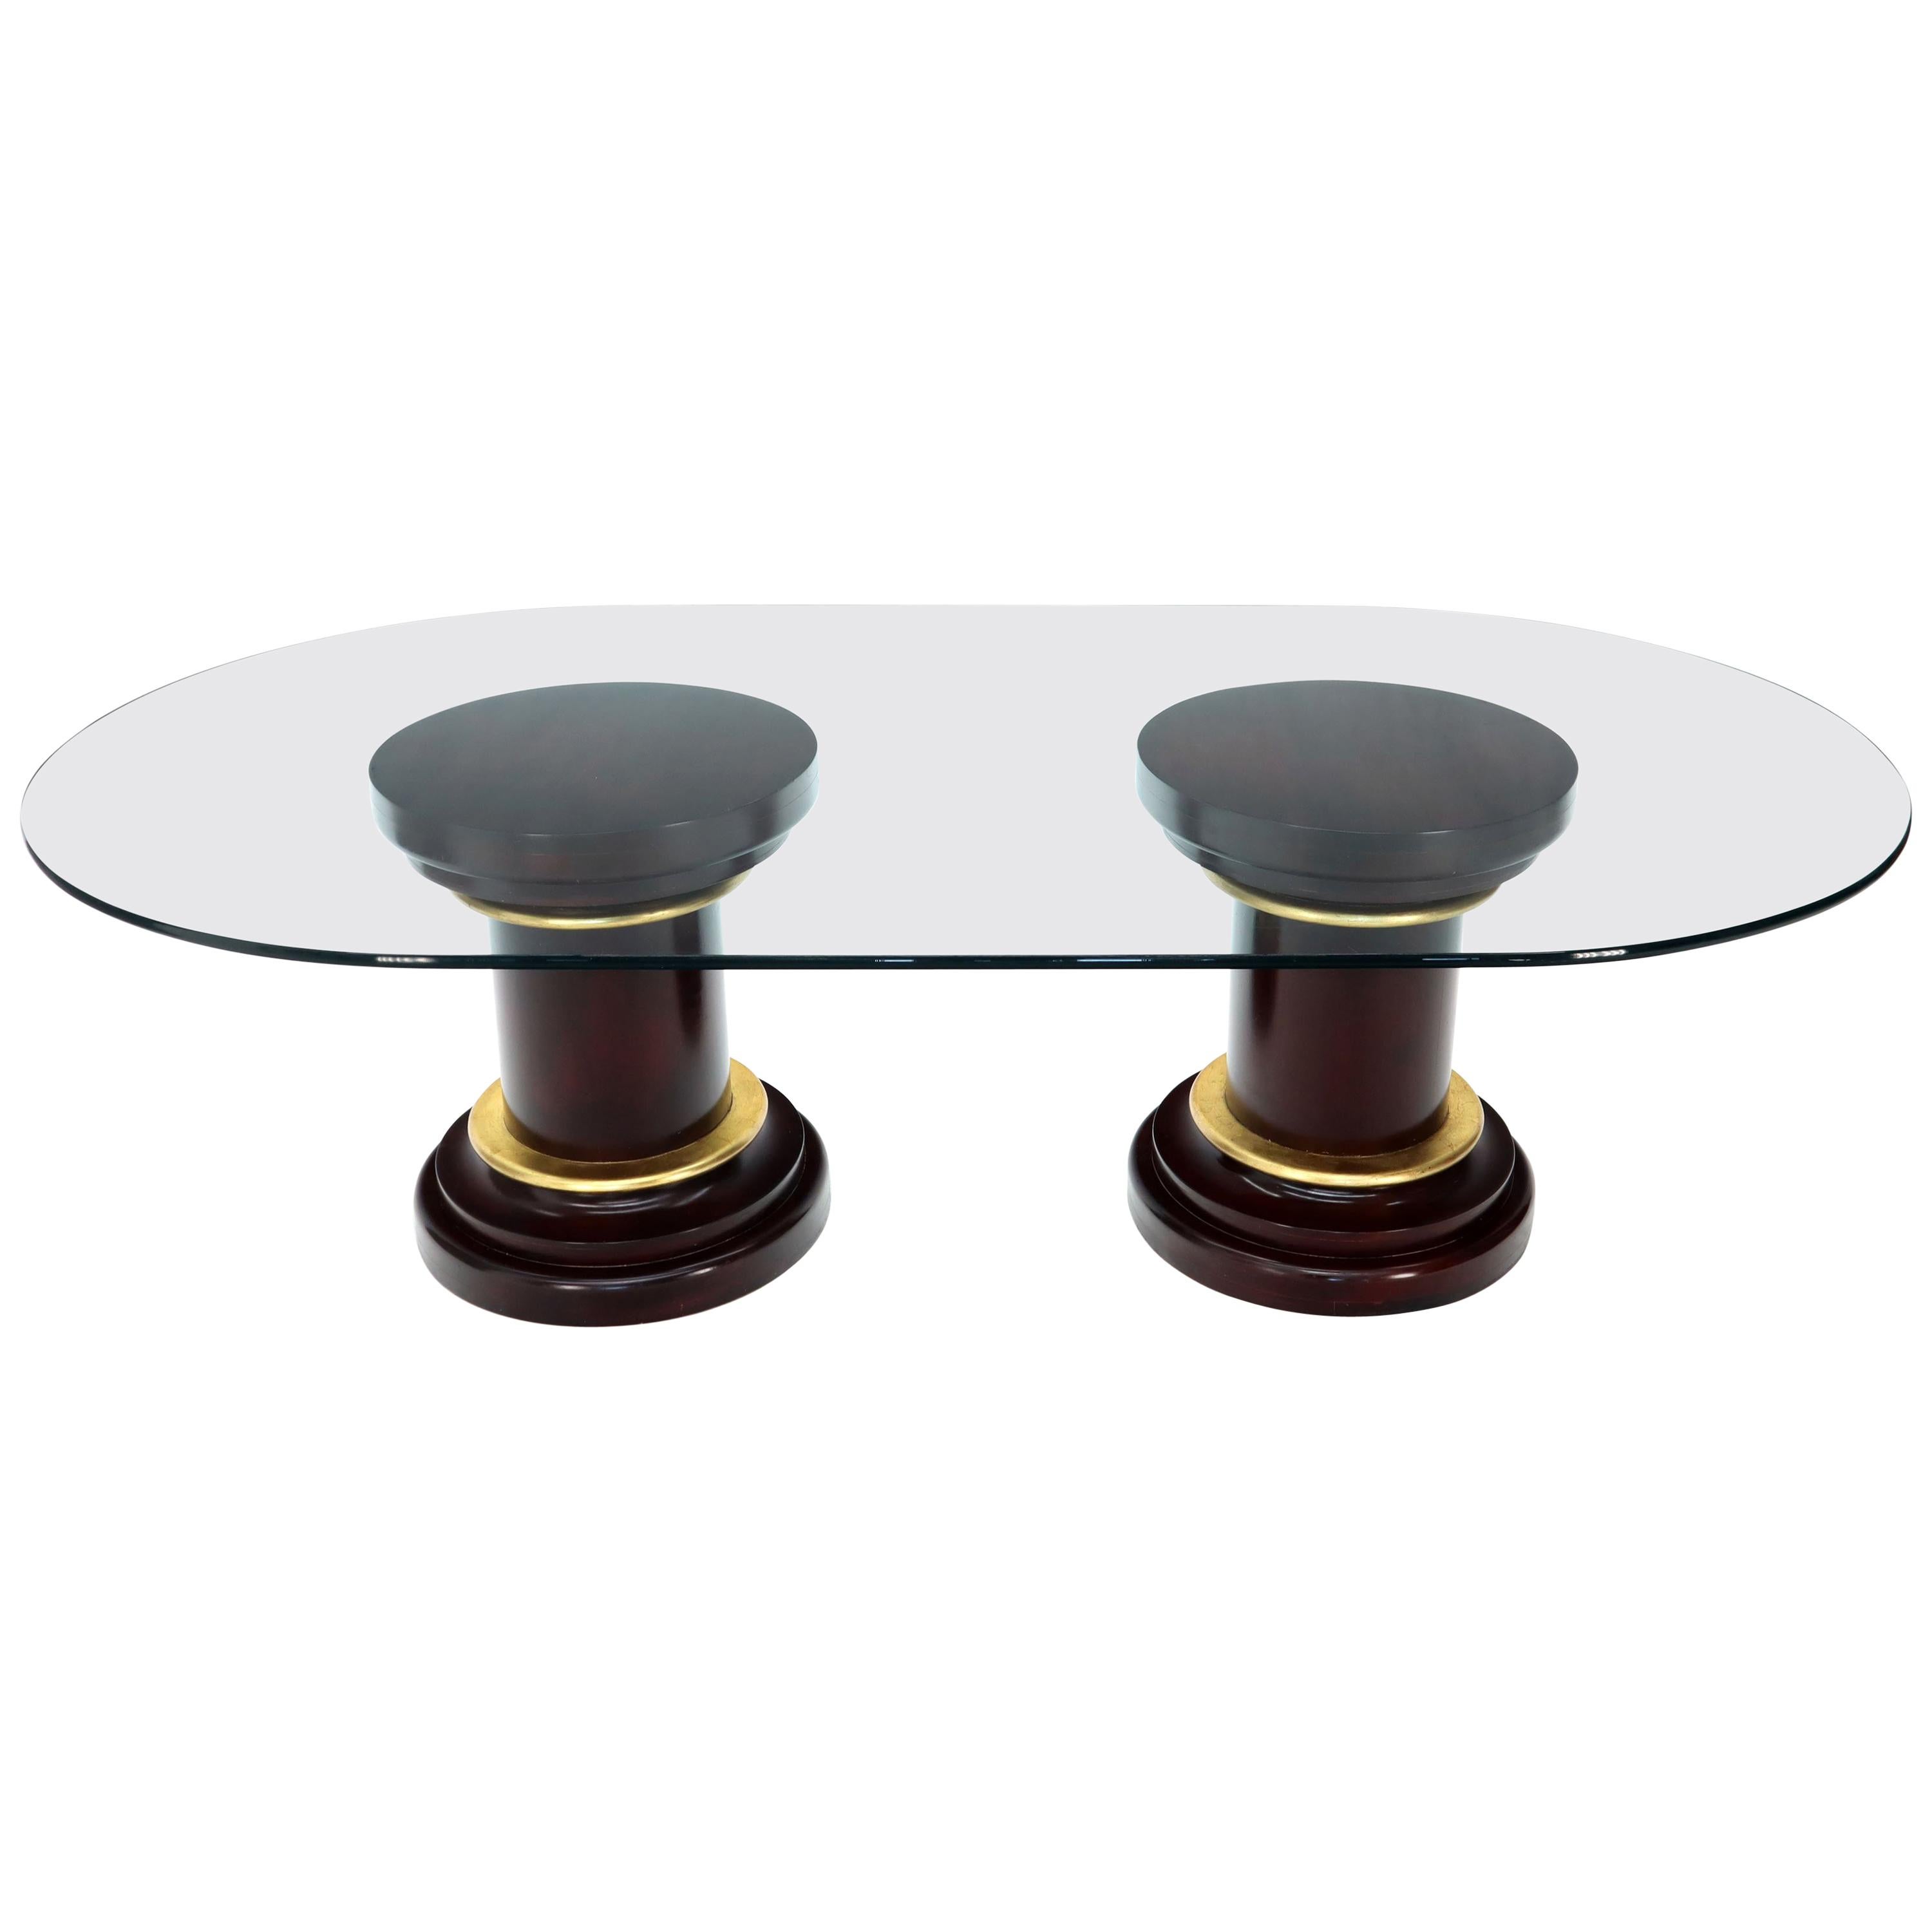 Large Oval Glass Top Two Round Turned Mahogany Pedestal Bases Dining Table